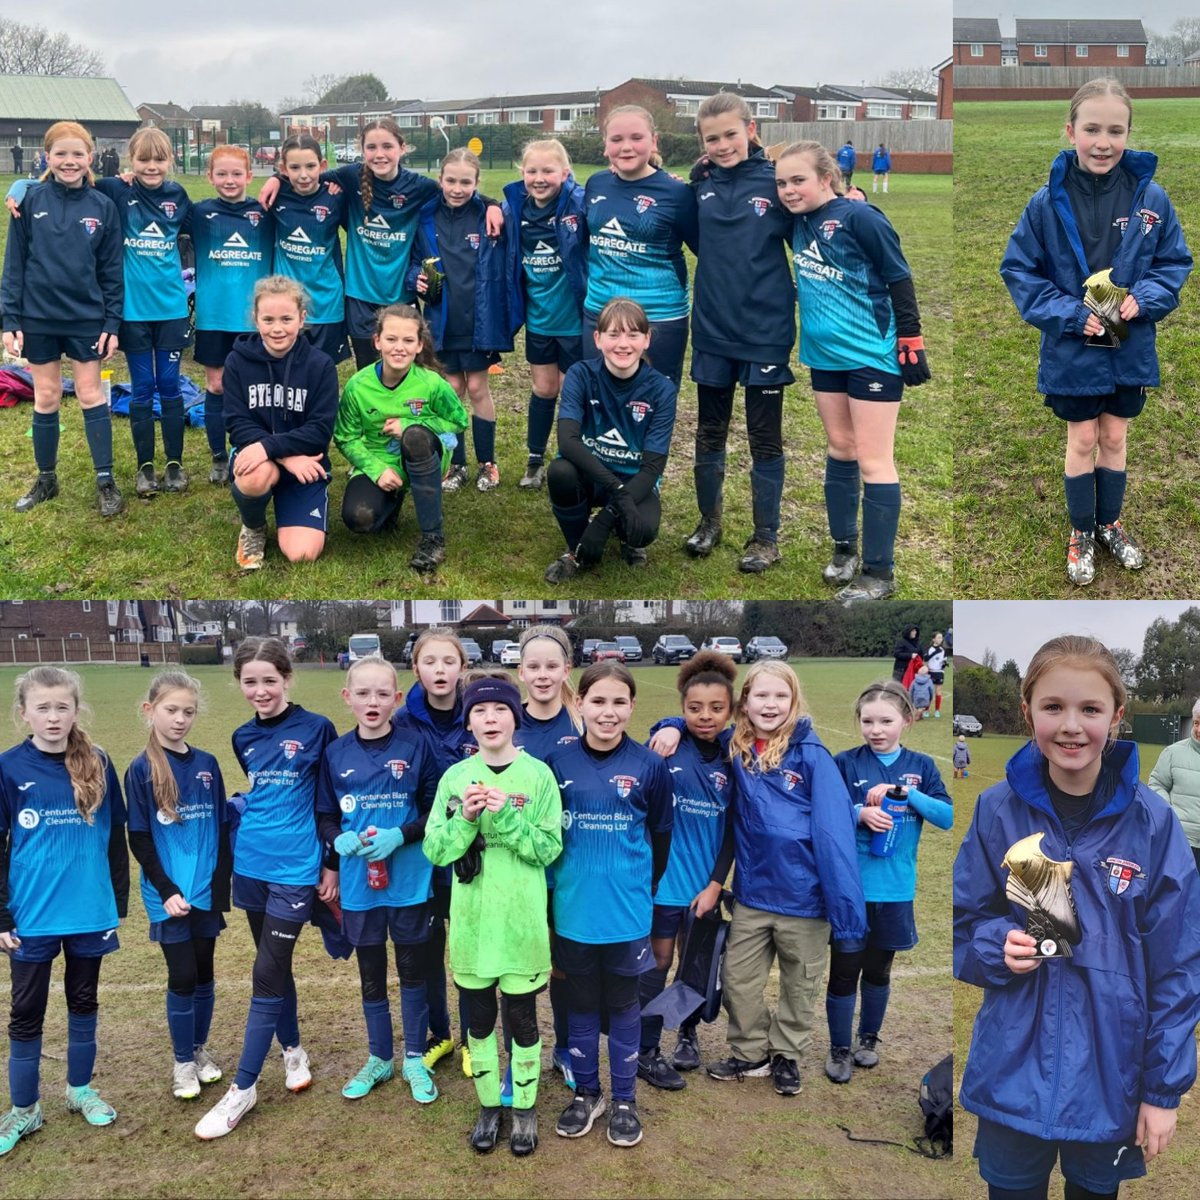 Thanks to @EuxtonGirlsFC & @cadleyfcgirls, not just for hosting, but for three fantastic games playing our u11s reds, u11s yellows & u14s. Proud of everyones performance and effort, & all still smiling at the final whistle! ⚽️⚽️⚽️ @JfcLancon @PdplGirls #lanconforlife